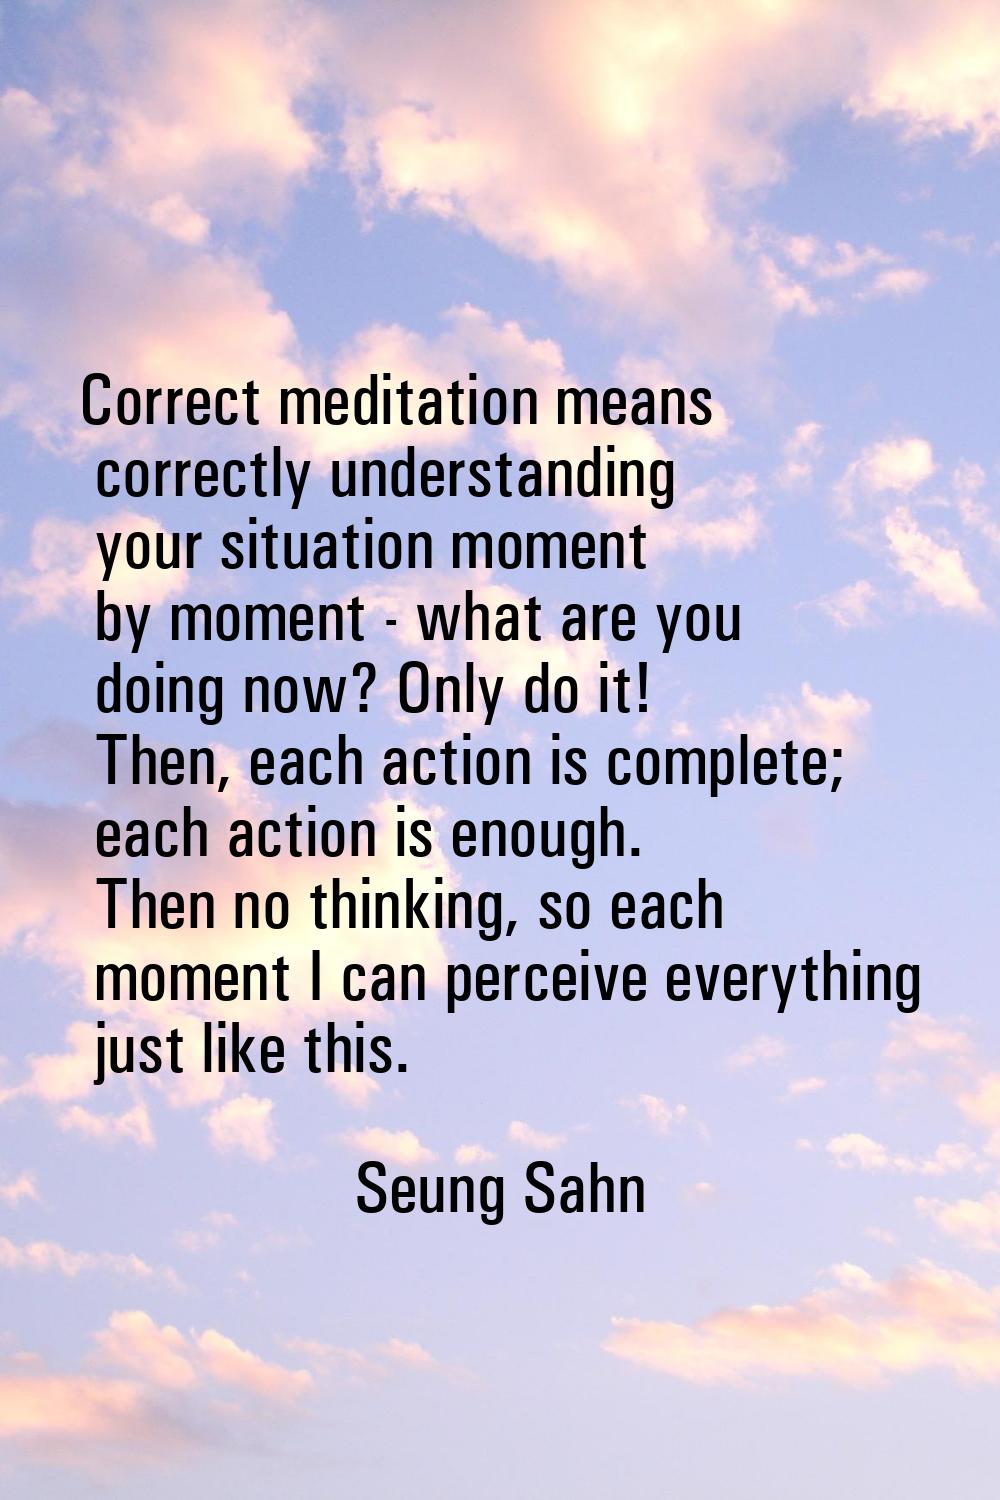 Correct meditation means correctly understanding your situation moment by moment - what are you doi